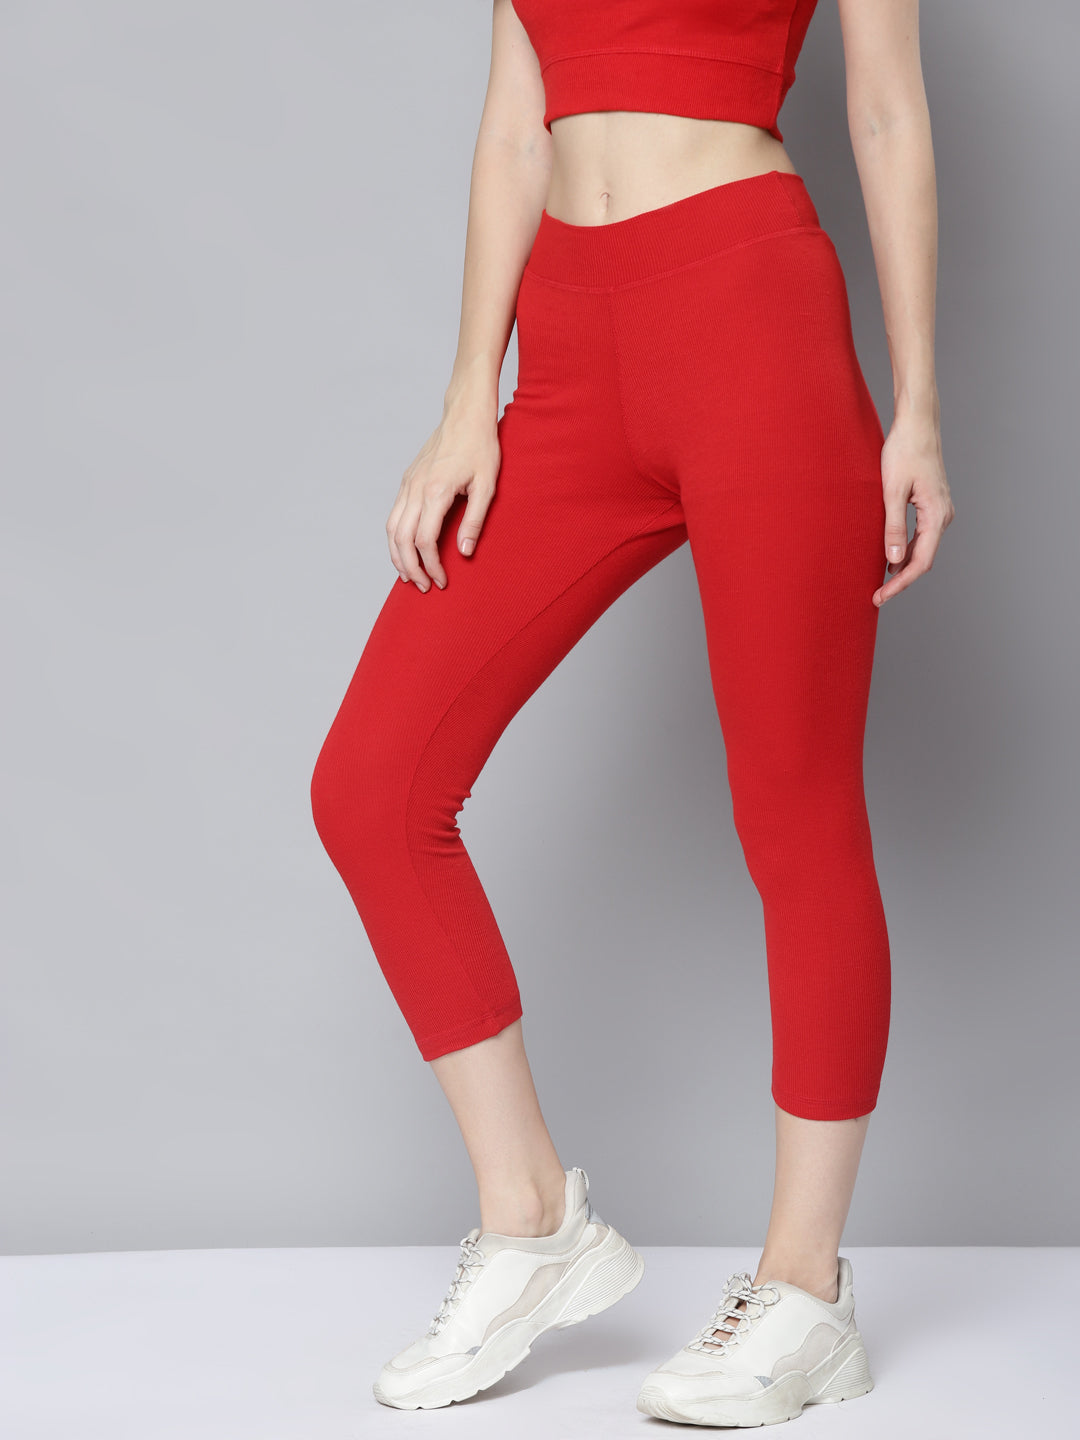 Women Red Rib Ankle Length ACTIVE Tights